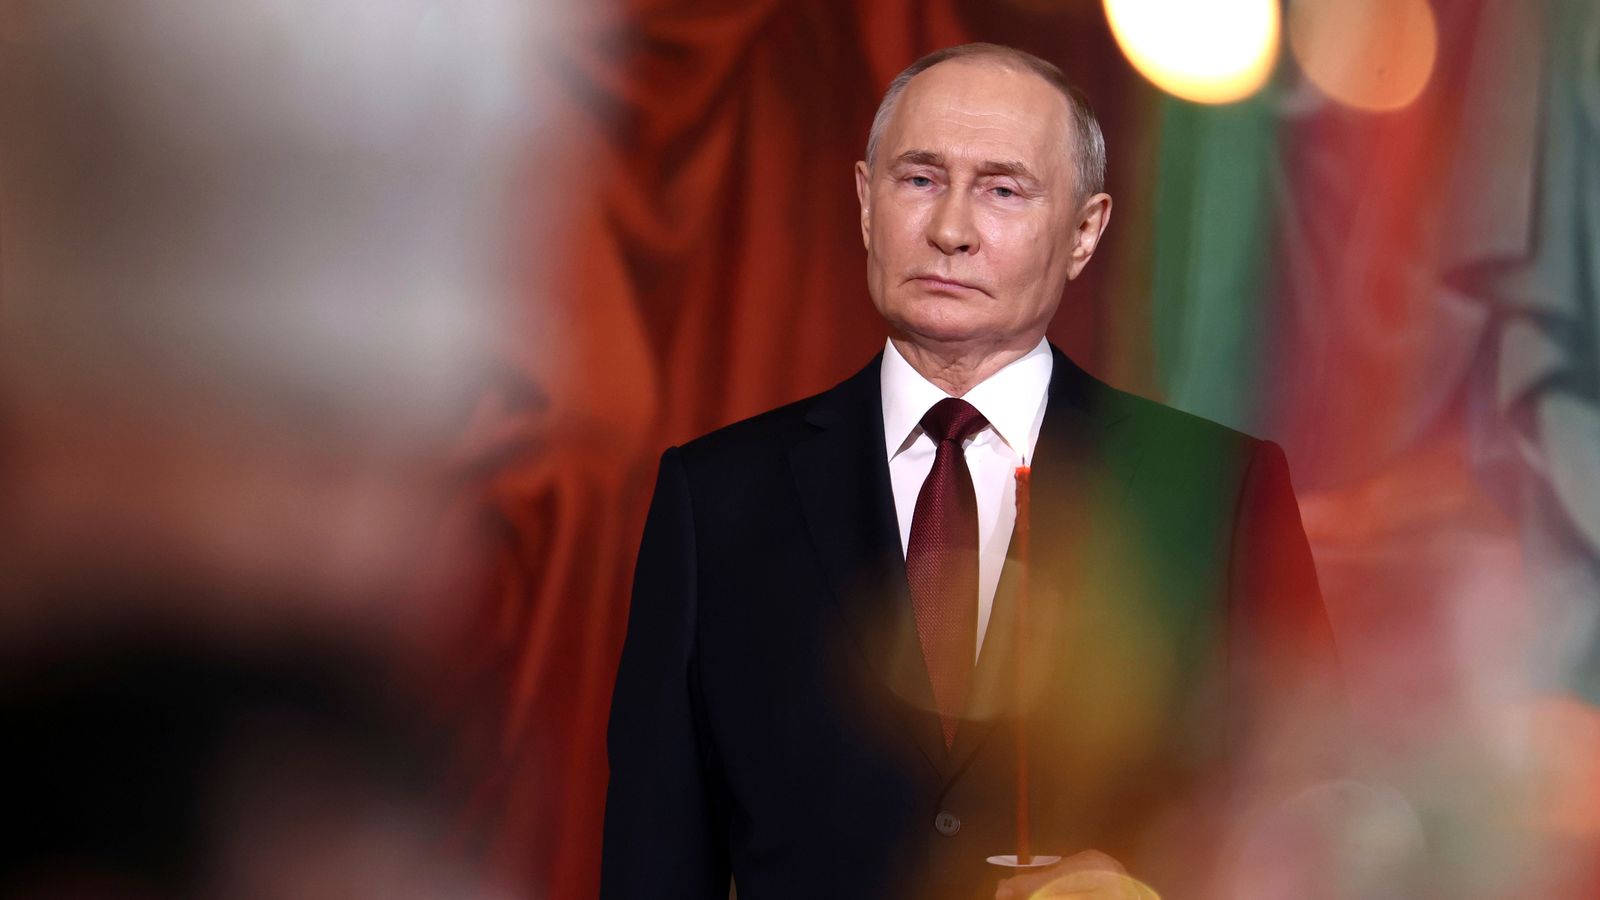 Vladimir Putin's fifth presidential inauguration marks more of the same for a Russia with little choice